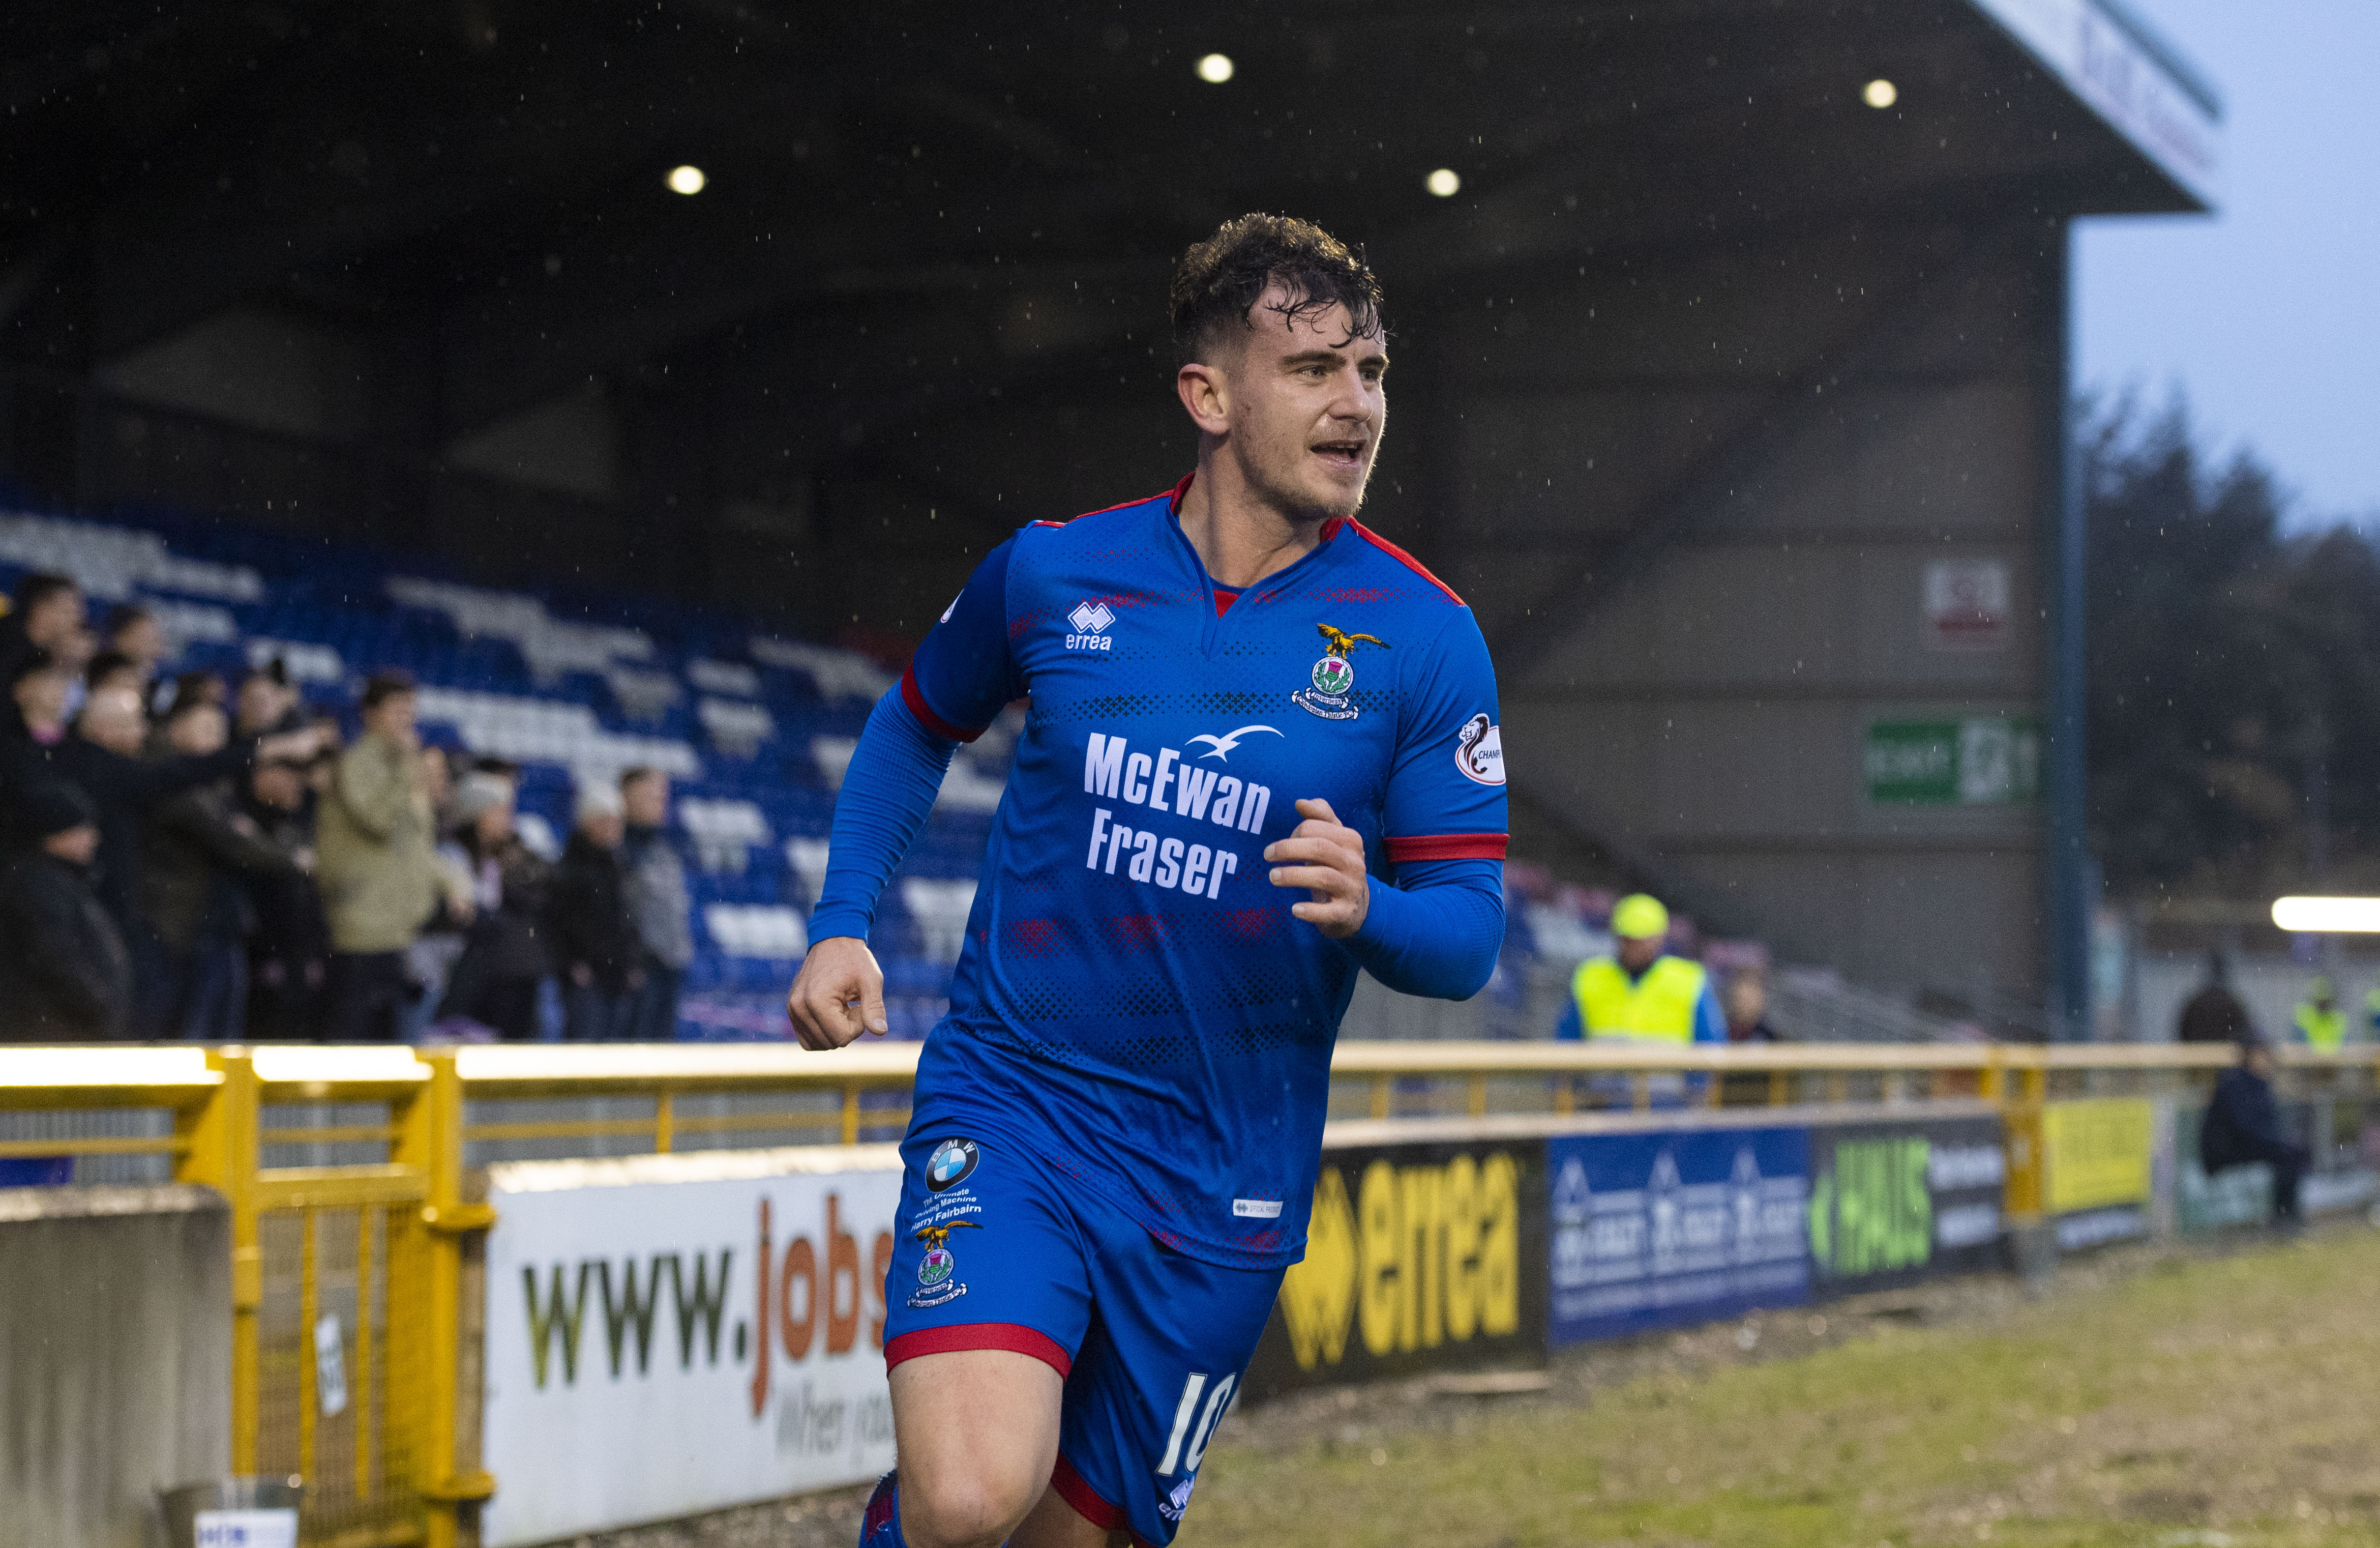 Inverness' Aaron Doran celebrates making it 1-0 during the Ladbrokes Championship match between Inverness Caledonian Thistle and Dundee.